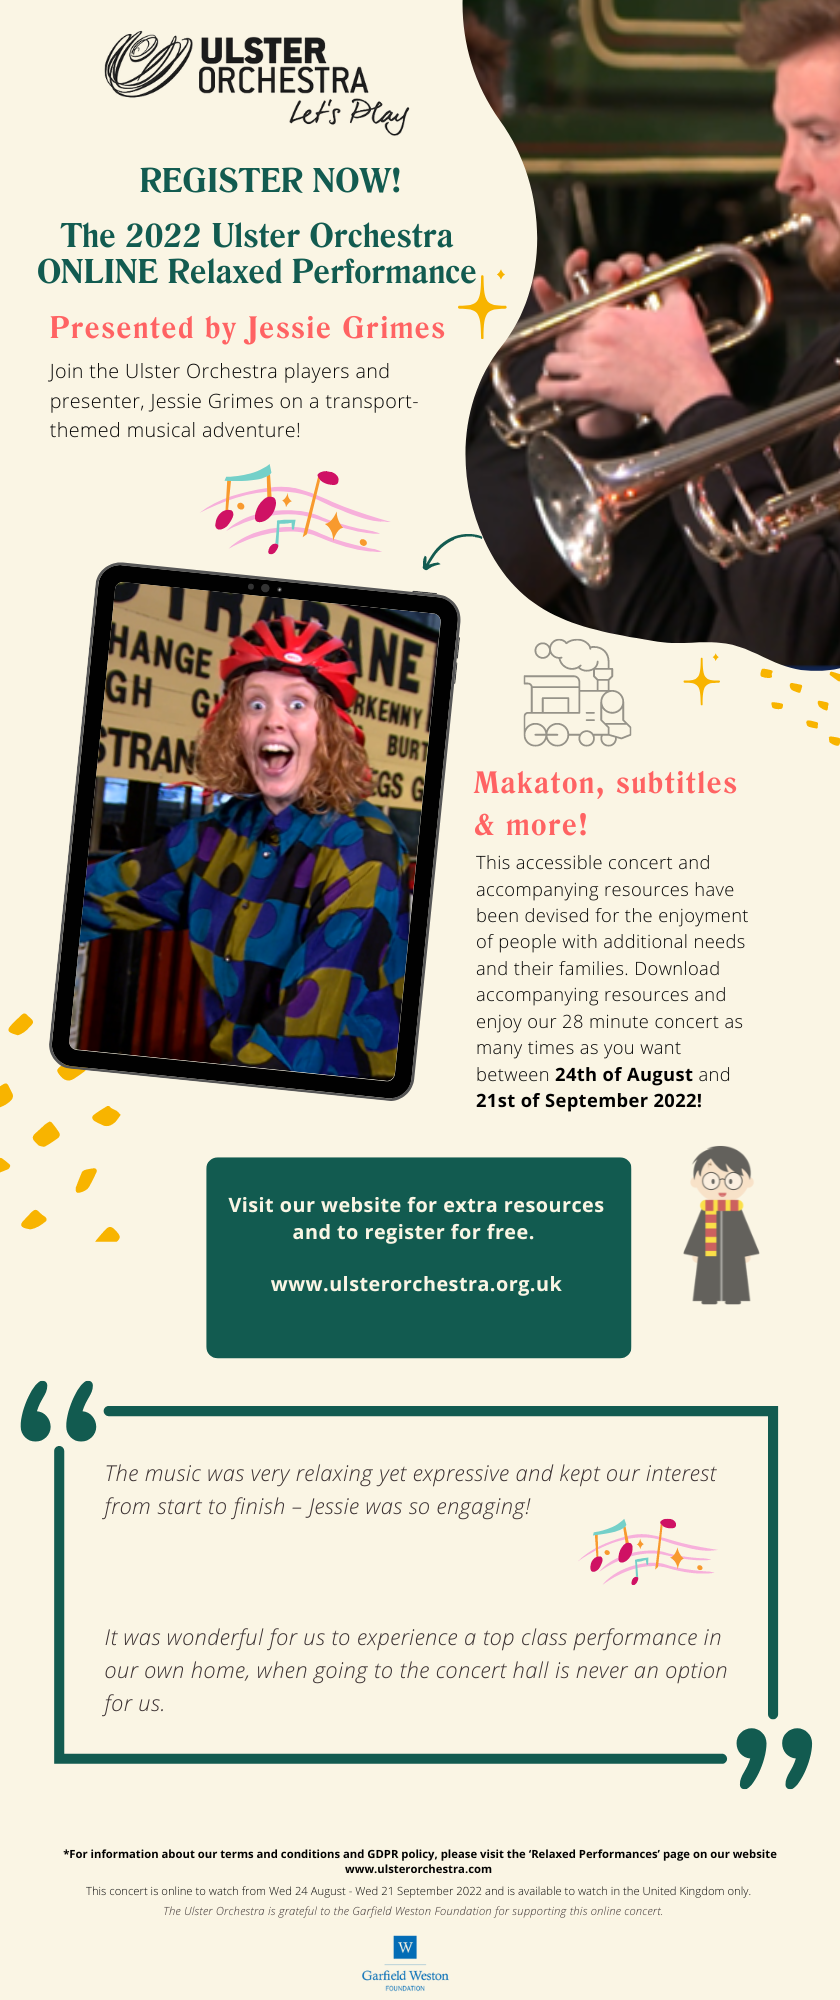 Flyer for Ulster Orchestra's 2022 Online Relaxed Concert, presented by Jessie Grimes. Join the Ulster Orchestra players and presenter, Jessie Grimes on a transport-themed musical adventure! With makaton, subtitles and more! This accessible concert and accompanying resources have been devised for the enjoyment of people with additional needs and their families in partnership with Autism NI. Download accompanying resources and enjoy our 28 minute concert as many times as you want between 24th August and 31st September. "The music was very relaxing yet expressive and kept our interest from start to finish - Jessie was so engaging!". "It was wonderful for us to experience a top class performance in our own home, when going to the concert hall is never an option for us.". Visit our website for extra resources and to register for free.